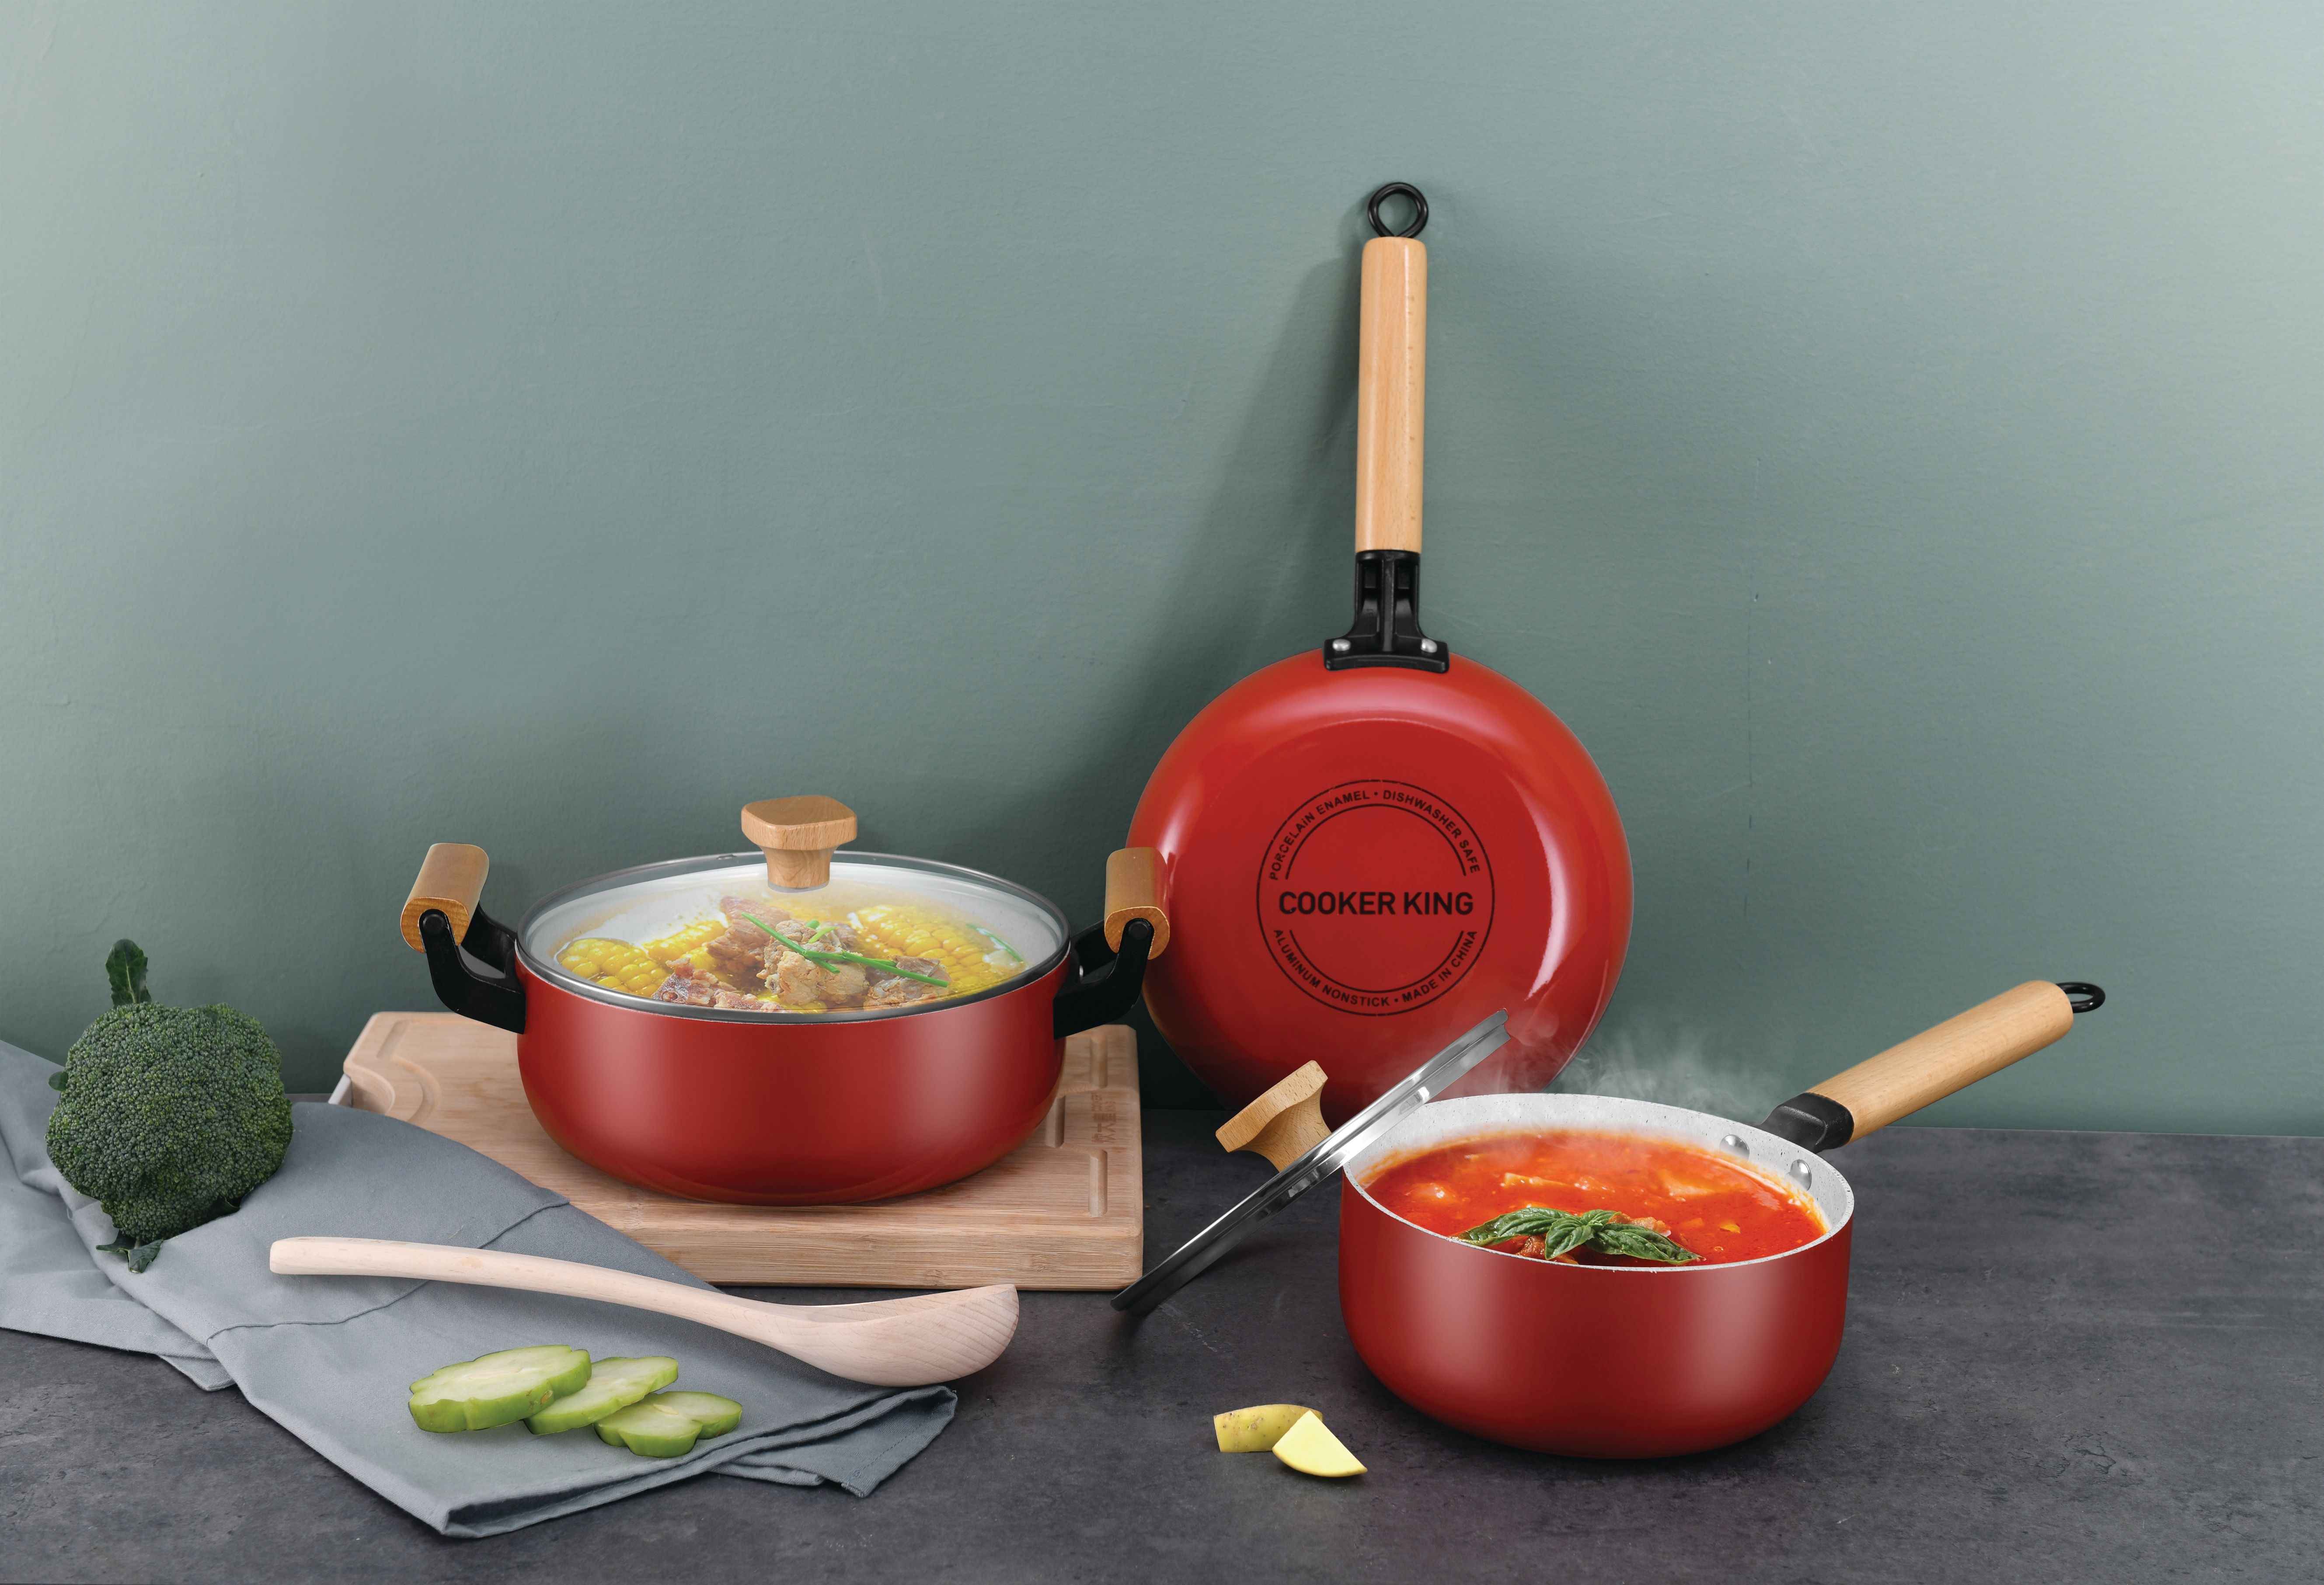 Cookware set as a gift for teachers who love to cook